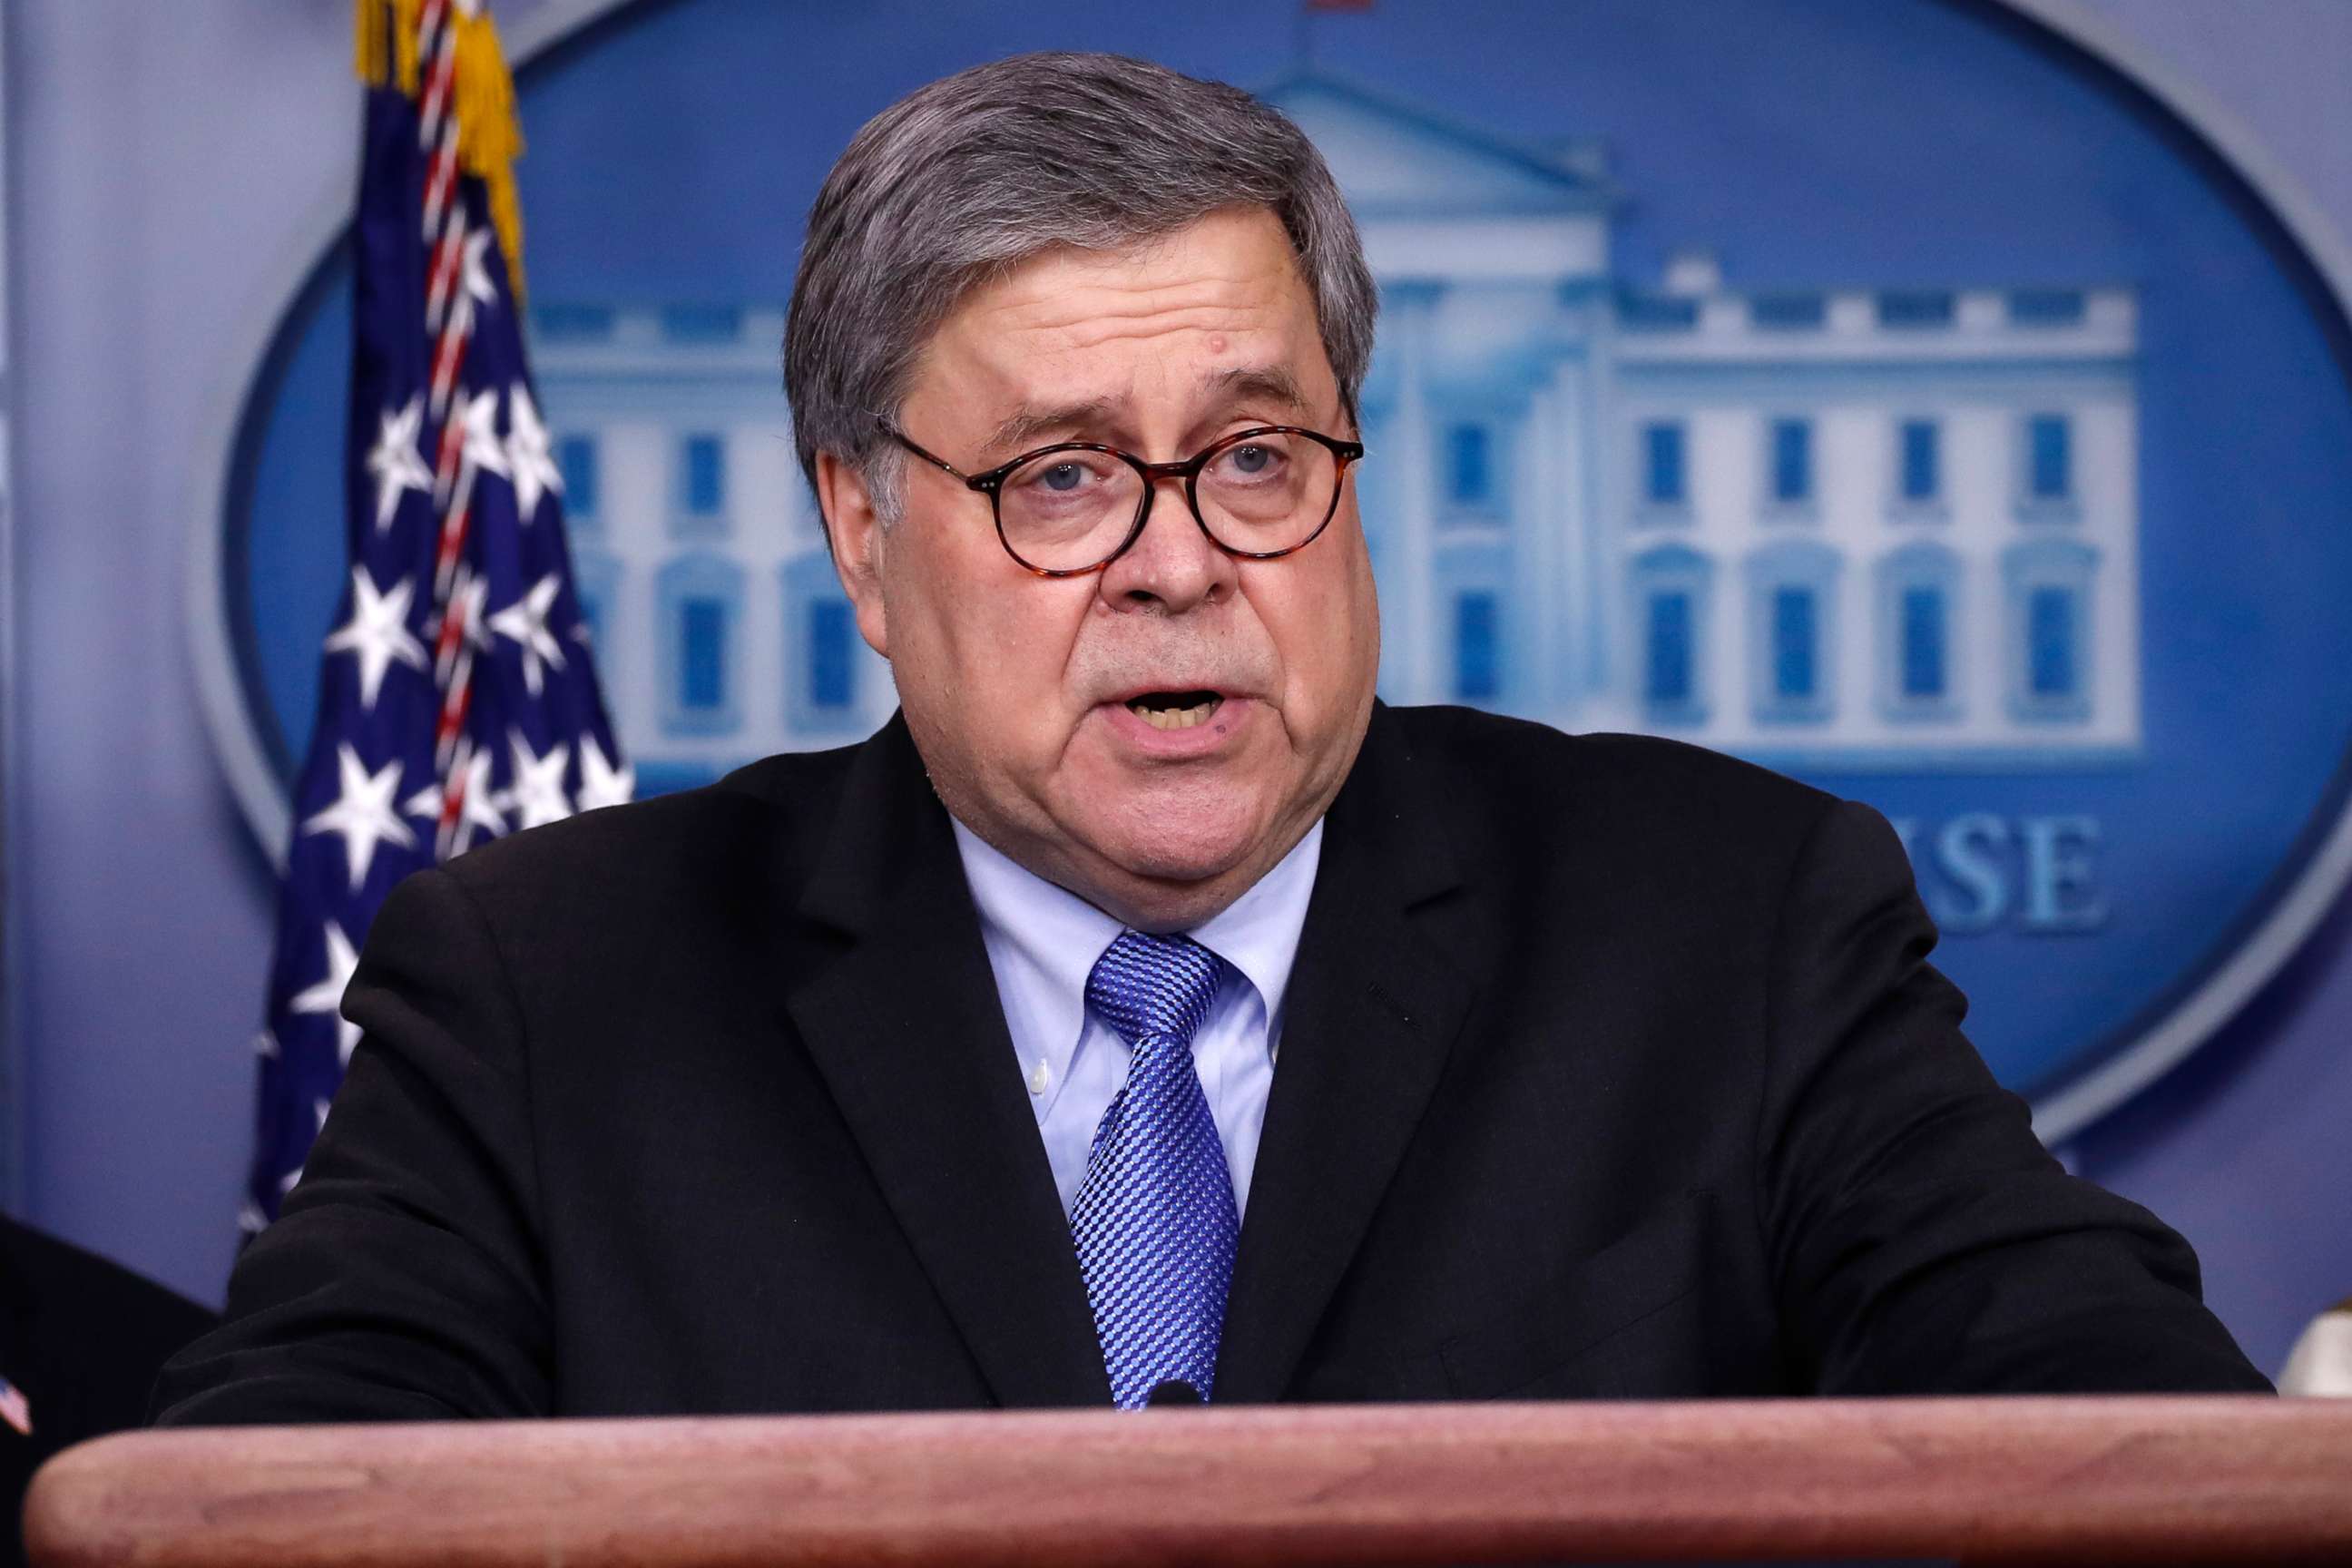 PHOTO: Attorney General William Barr speaks about the coronavirus in the James Brady Briefing Room, March 23, 2020, in Washington.